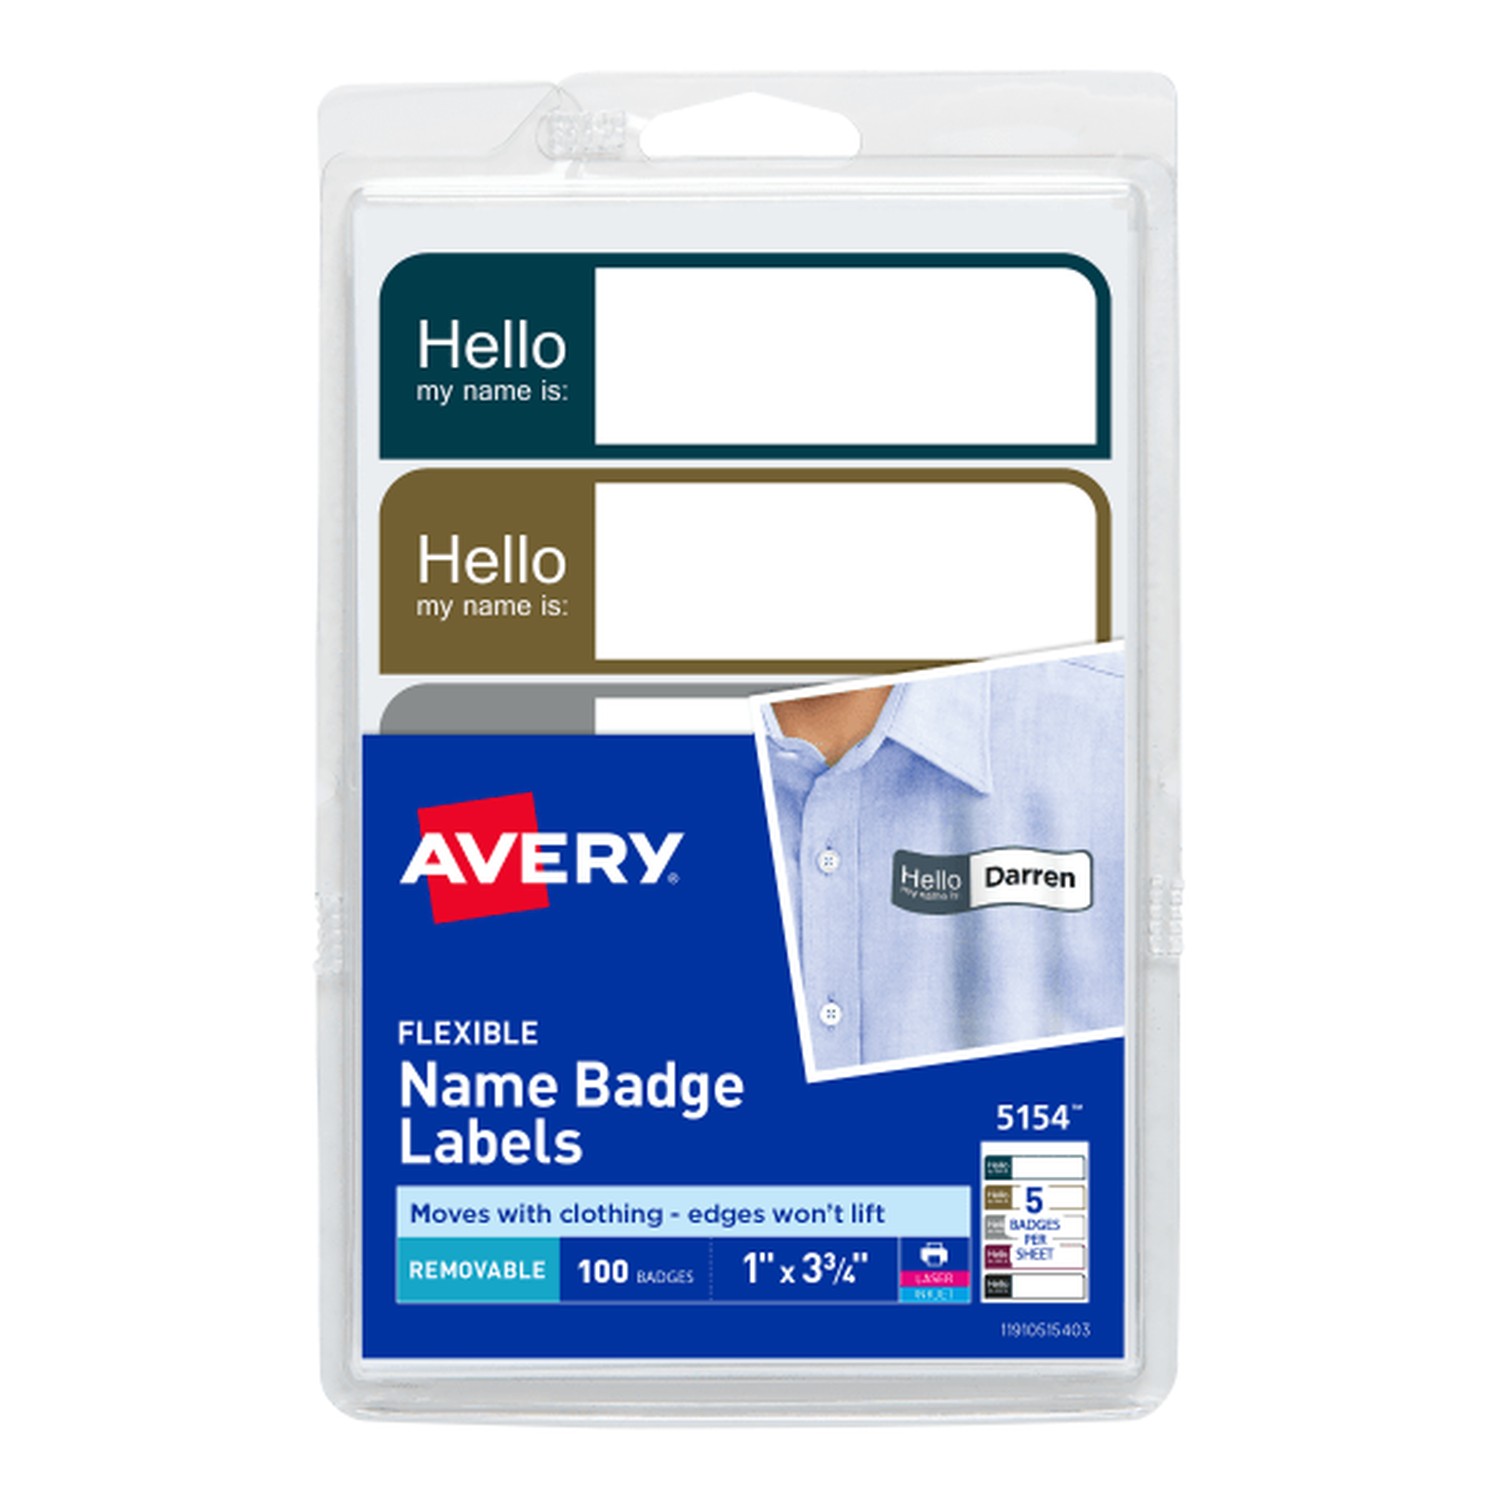 Avery "Hello" Flexible Self-Adhesive Name Badge Labels, 1 x 3-3/4, Prof. Asst, 100/Pack 